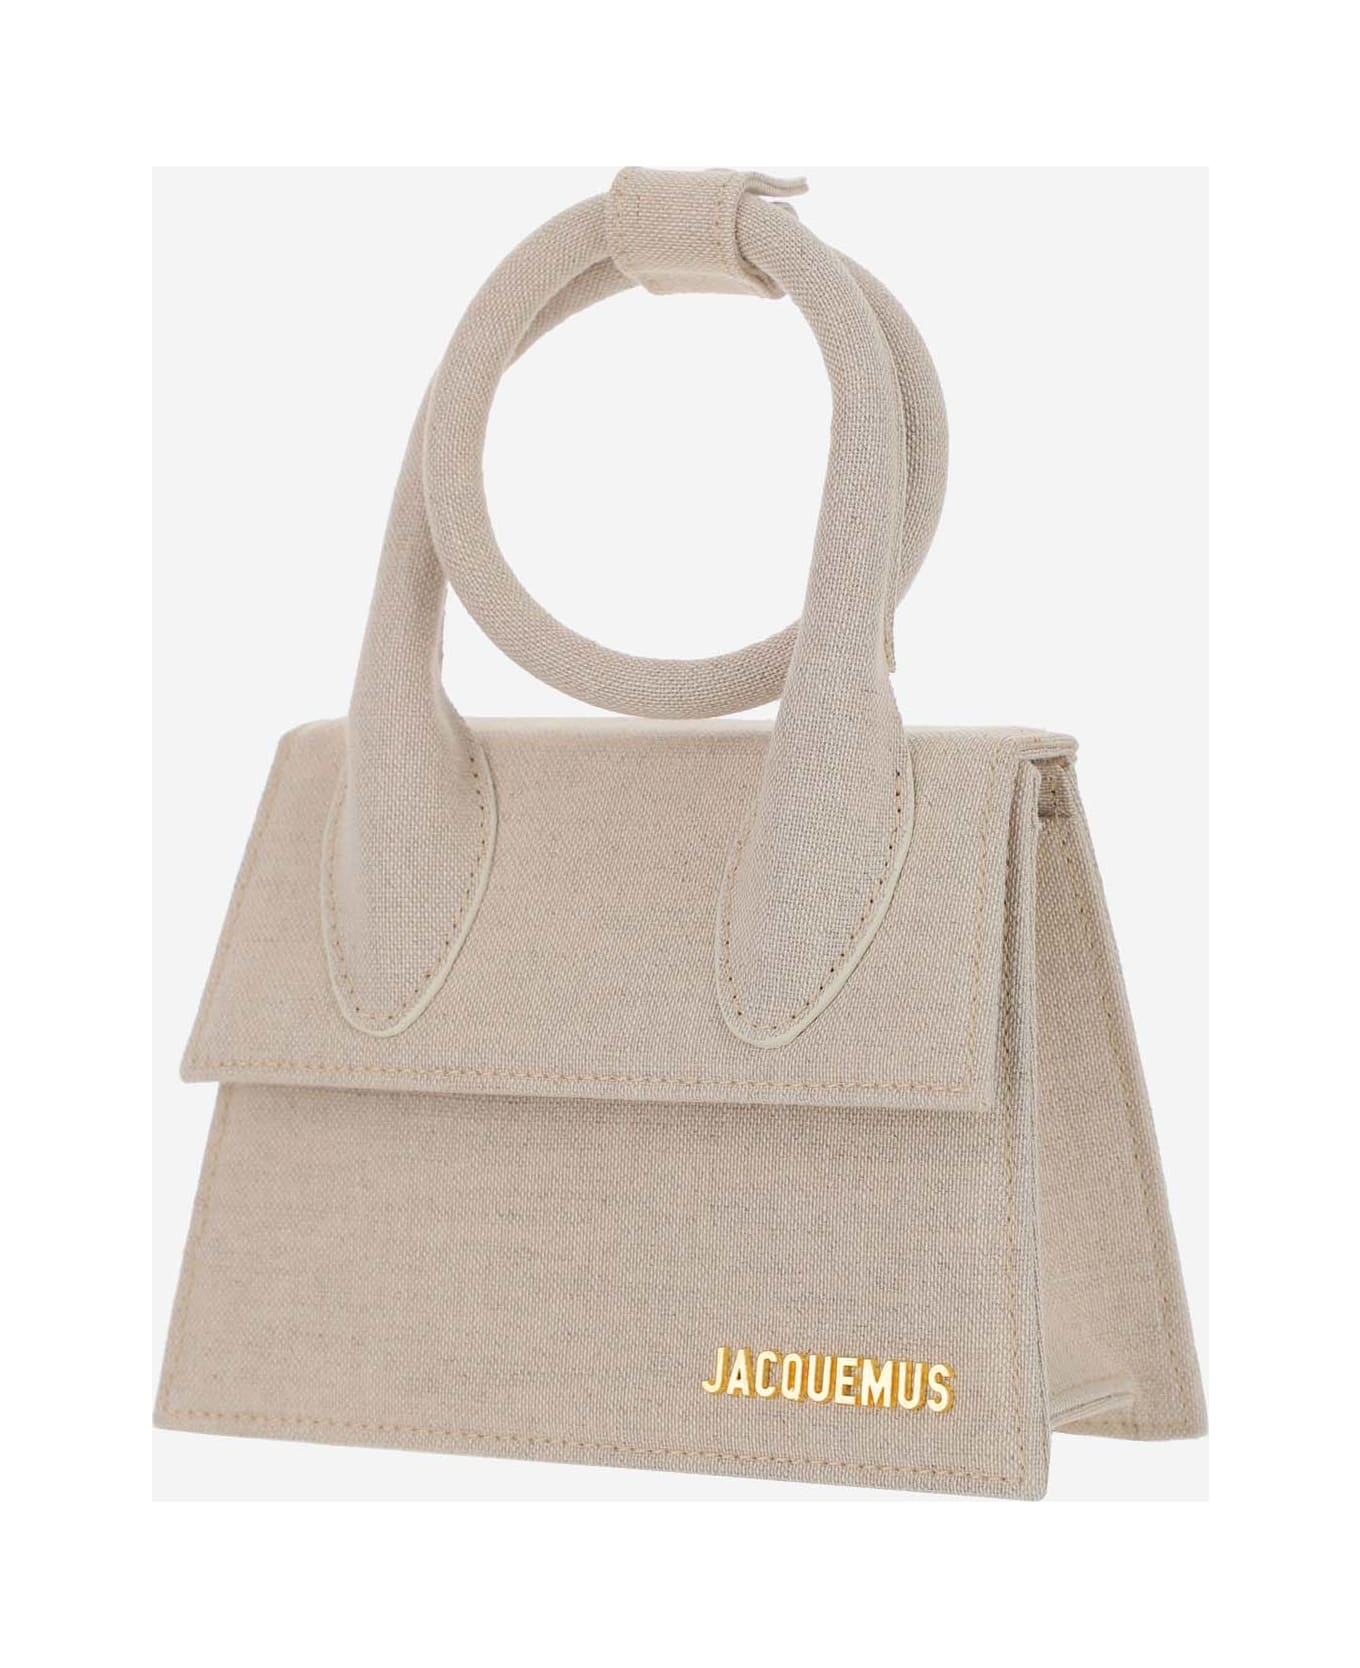 Jacquemus Le Chiquito Noeud Bag - LIGHT GREIGE トートバッグ